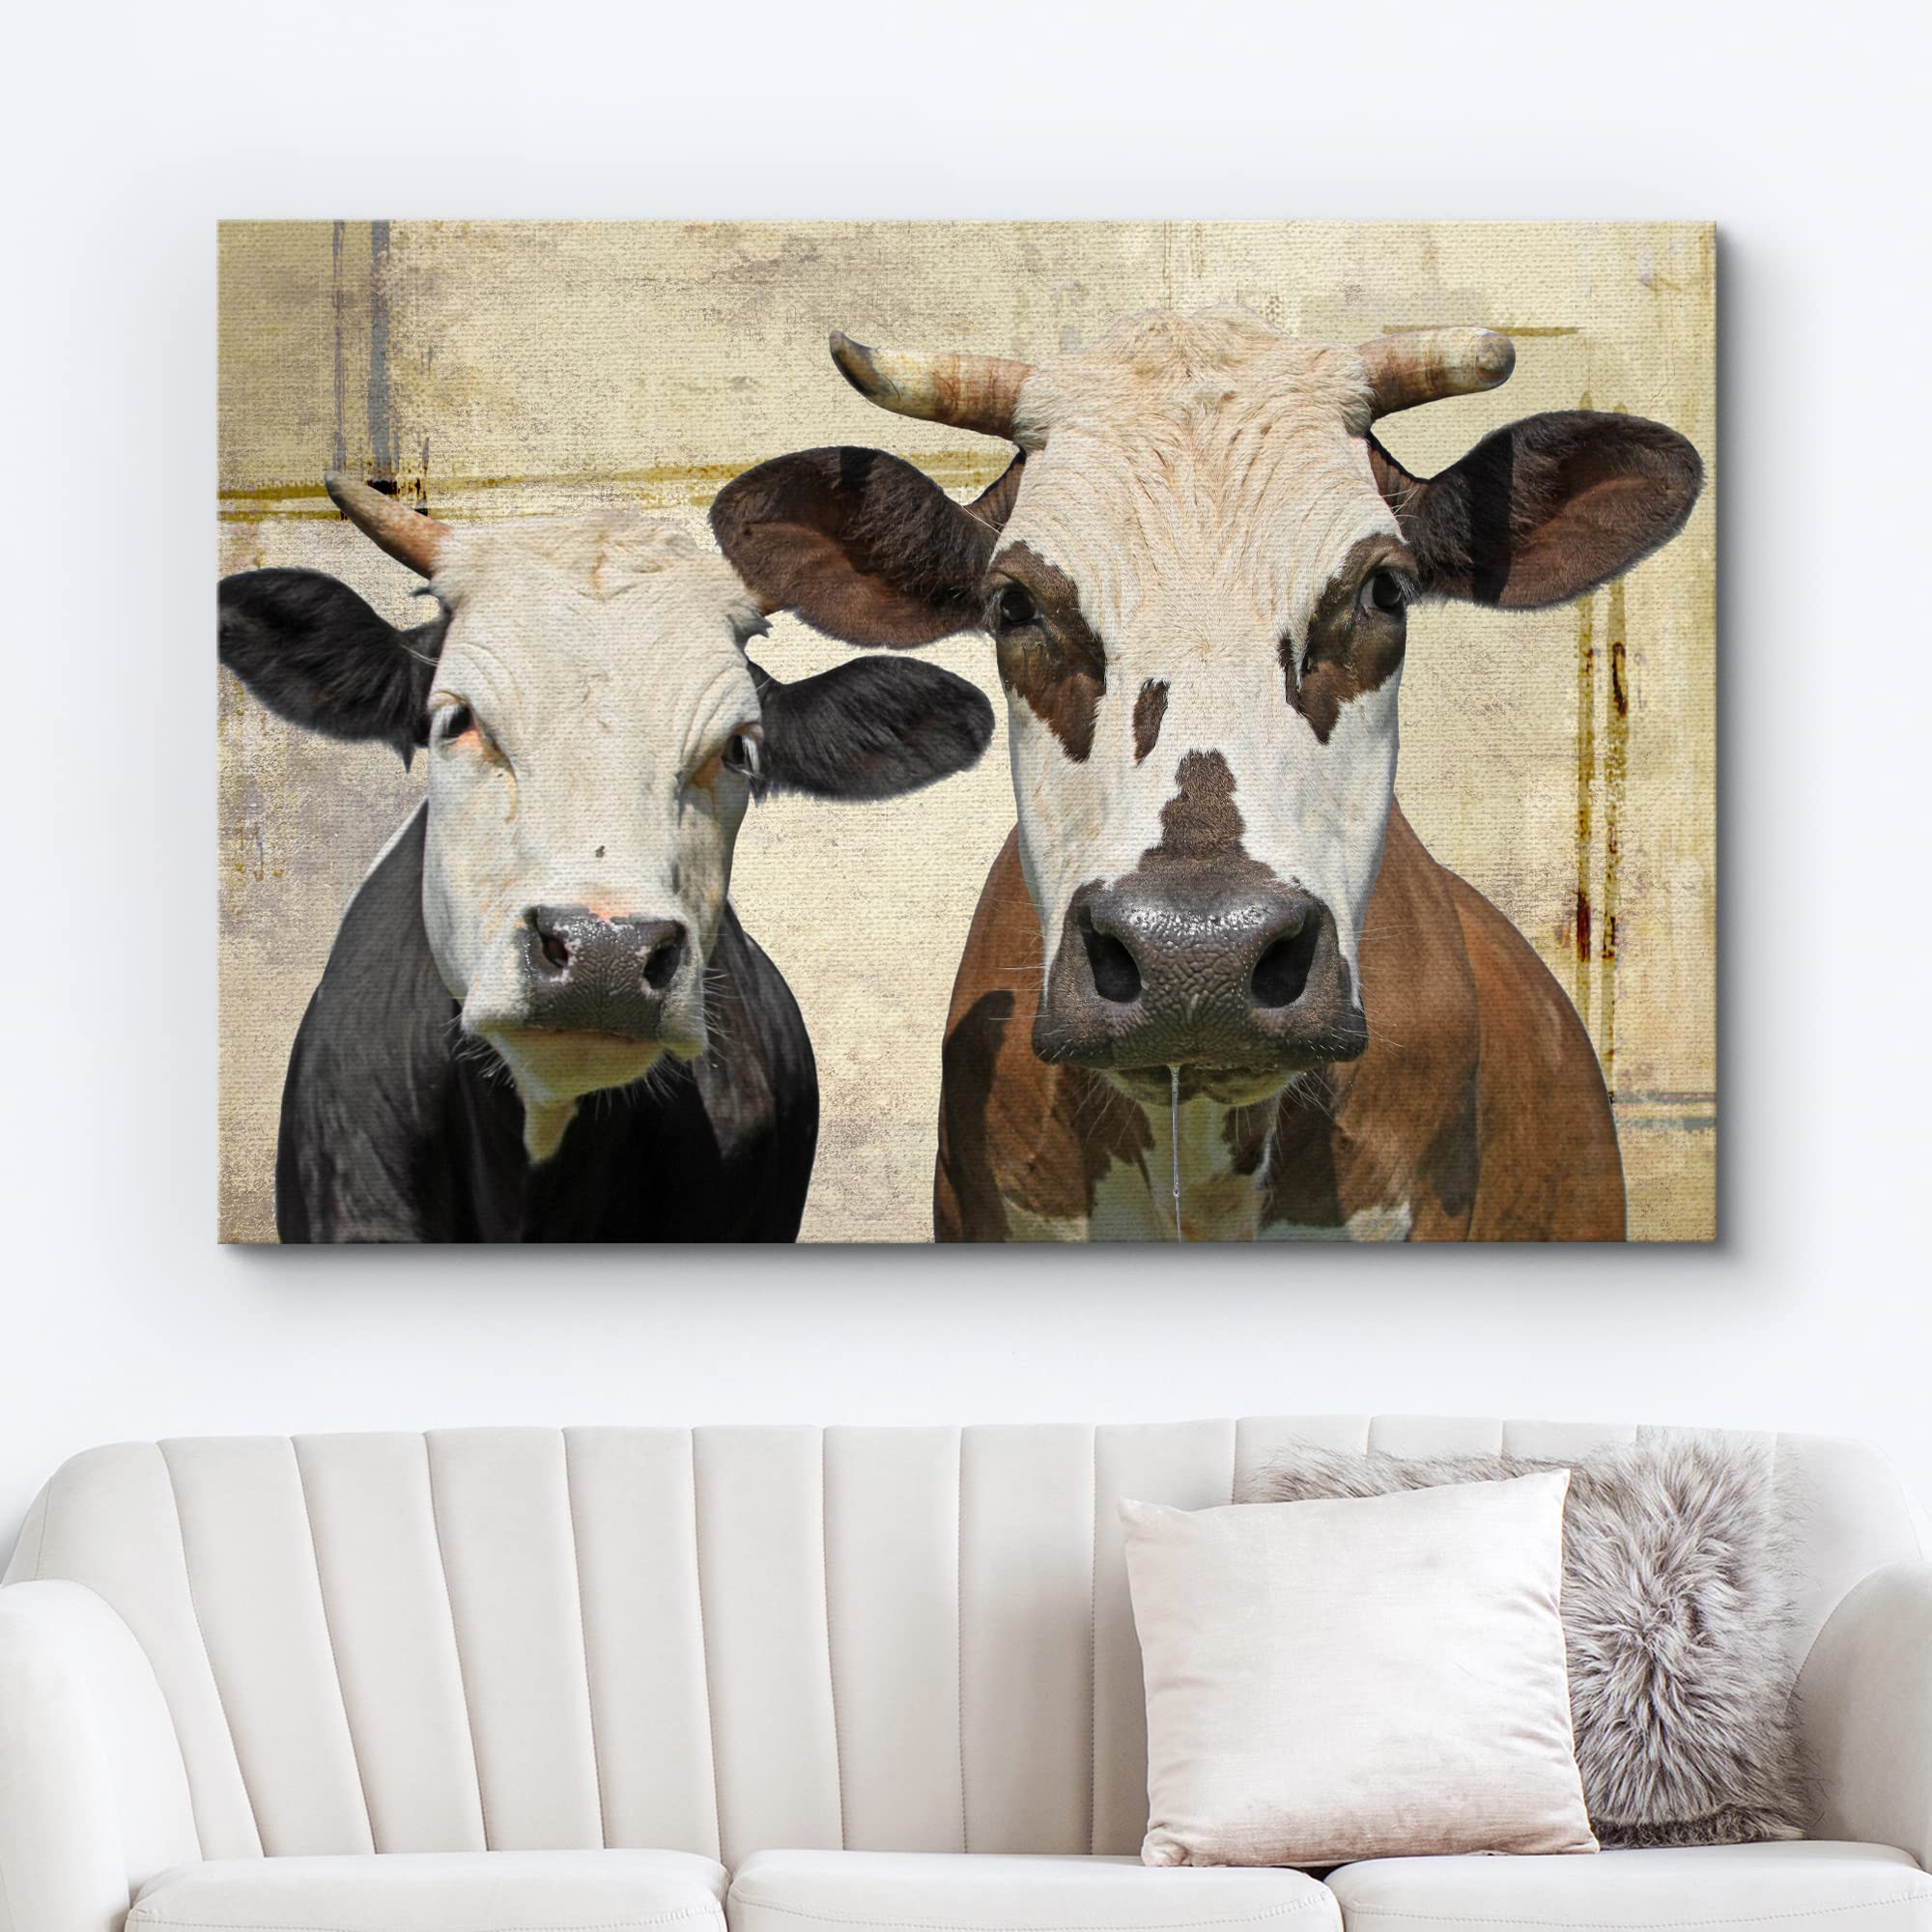 wall26 Canvas Print Wall Art Brown &amp; Black Cow Duo with Grunge Background Animals Wildlife Digital Art Realism Rustic Scenic Nature Photography Colorful for Living Room, Bedroom, Office - 24&quot - image 2 of 5